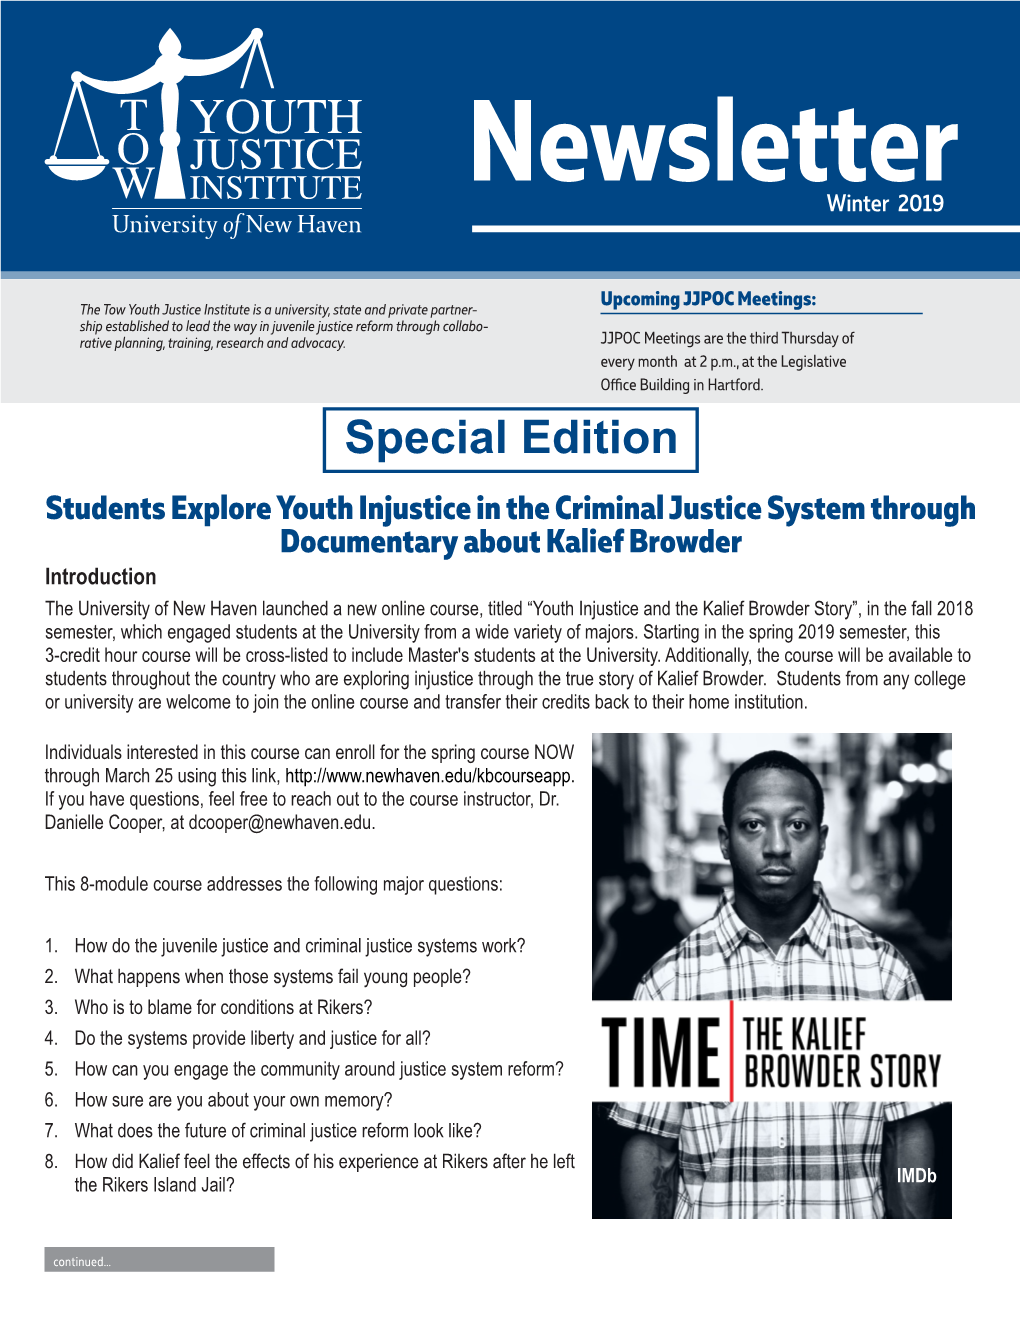 Youth Injustice and the Kalief Browder Story”, in the Fall 2018 Semester, Which Engaged Students at the University from a Wide Variety of Majors